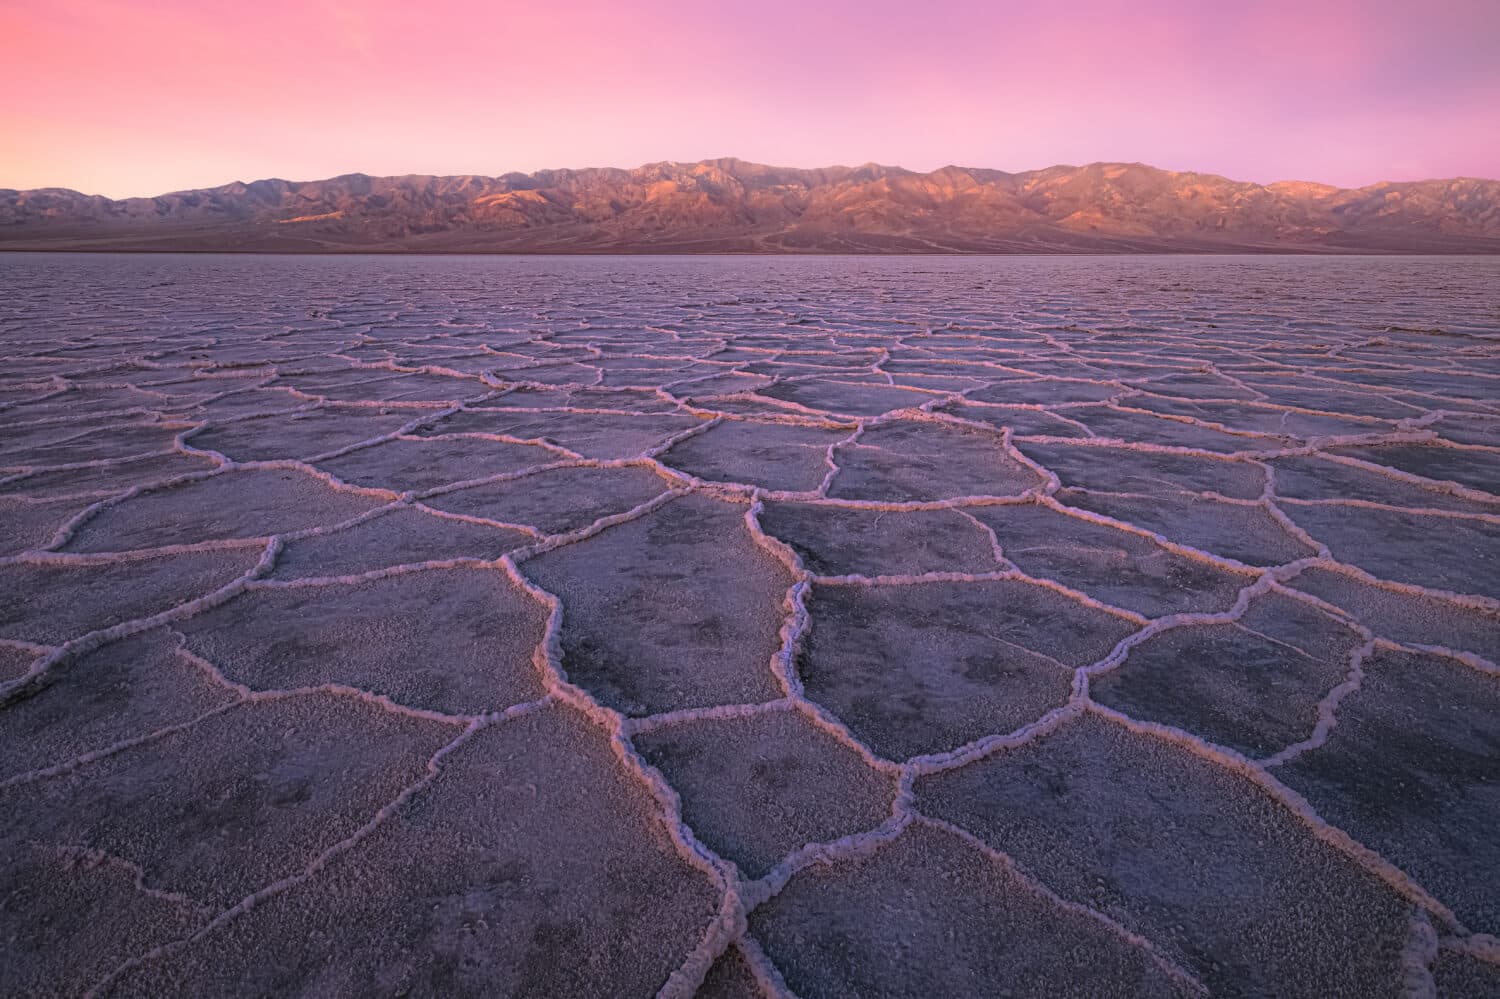 Beautiful, inspiring landscape and halite texture of Badwater Basin salt flats under a colourful, vibrant sunset or sunrise pink sky at Death Valley National Park, USA.